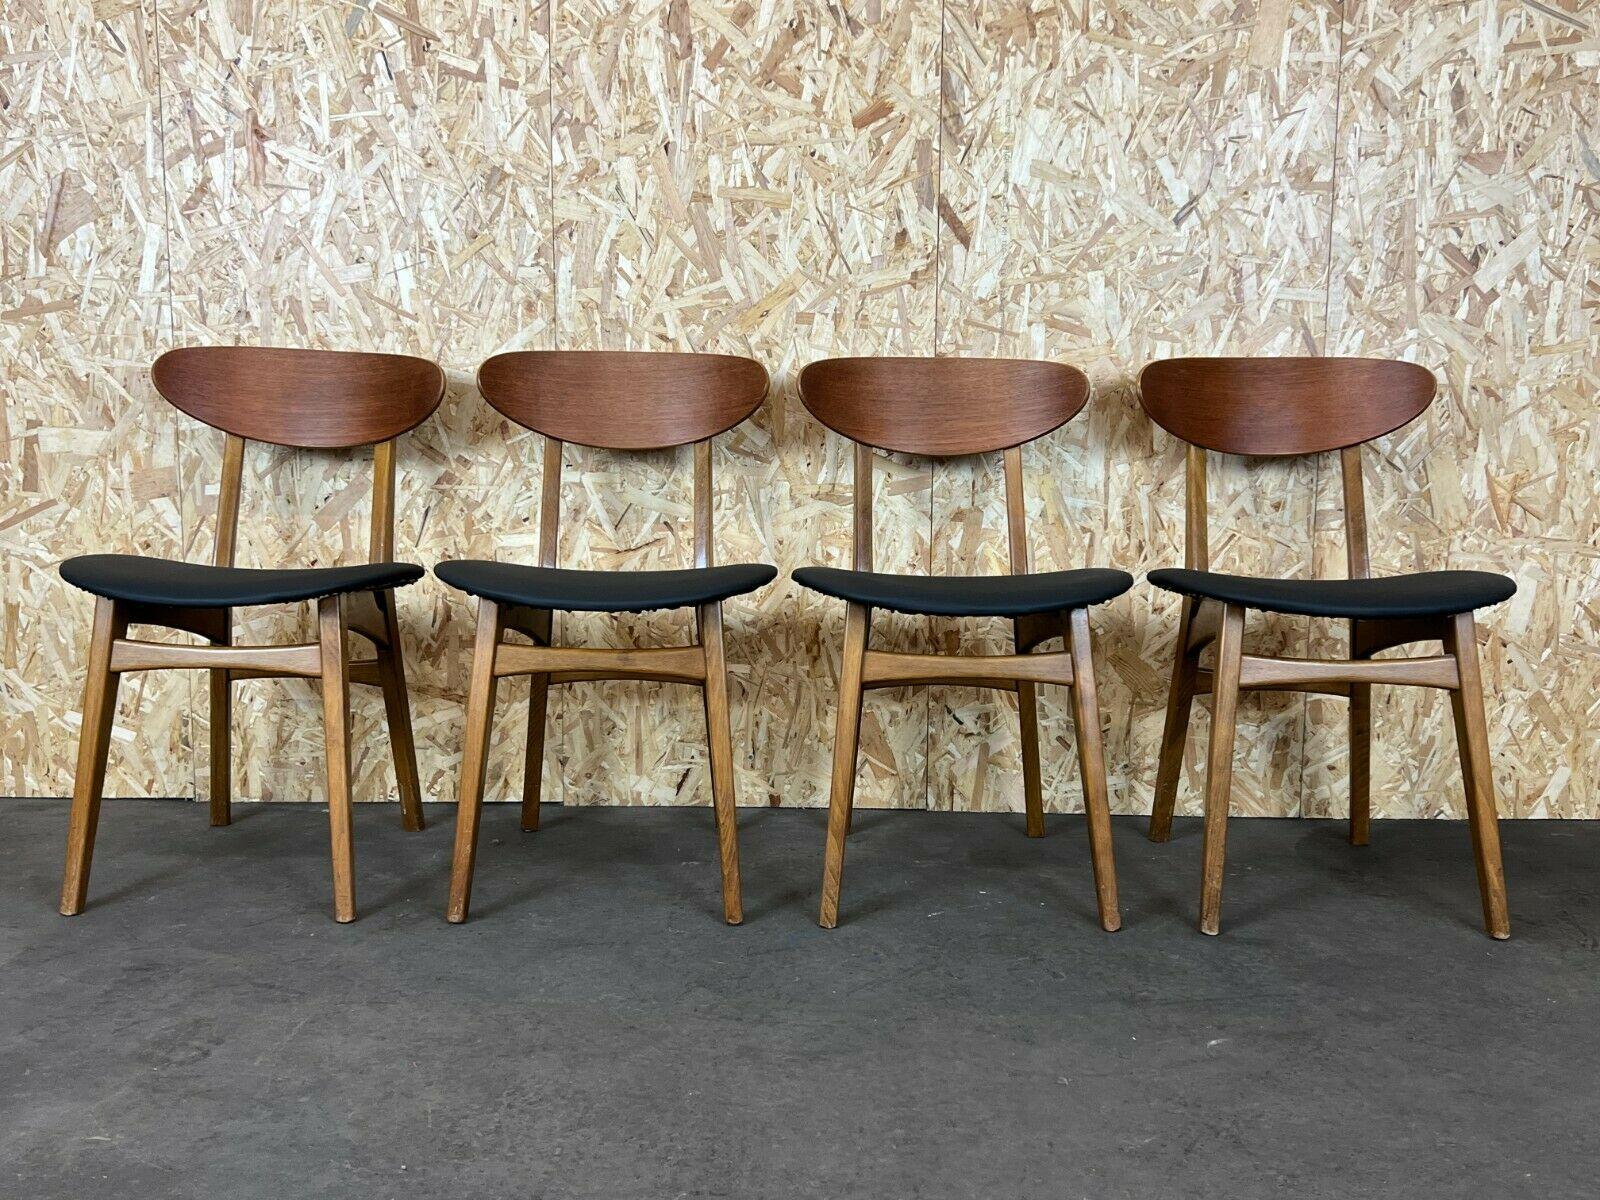 4x 60s 70s teak chairs dining chair Danish Modern Design 60s

Object: 4x chair

Manufacturer:

Condition: good - vintage

Age: around 1960-1970

Dimensions:

48.5cm x 53cm x 77.5cm
Seat height = 45cm

Other notes:

The pictures